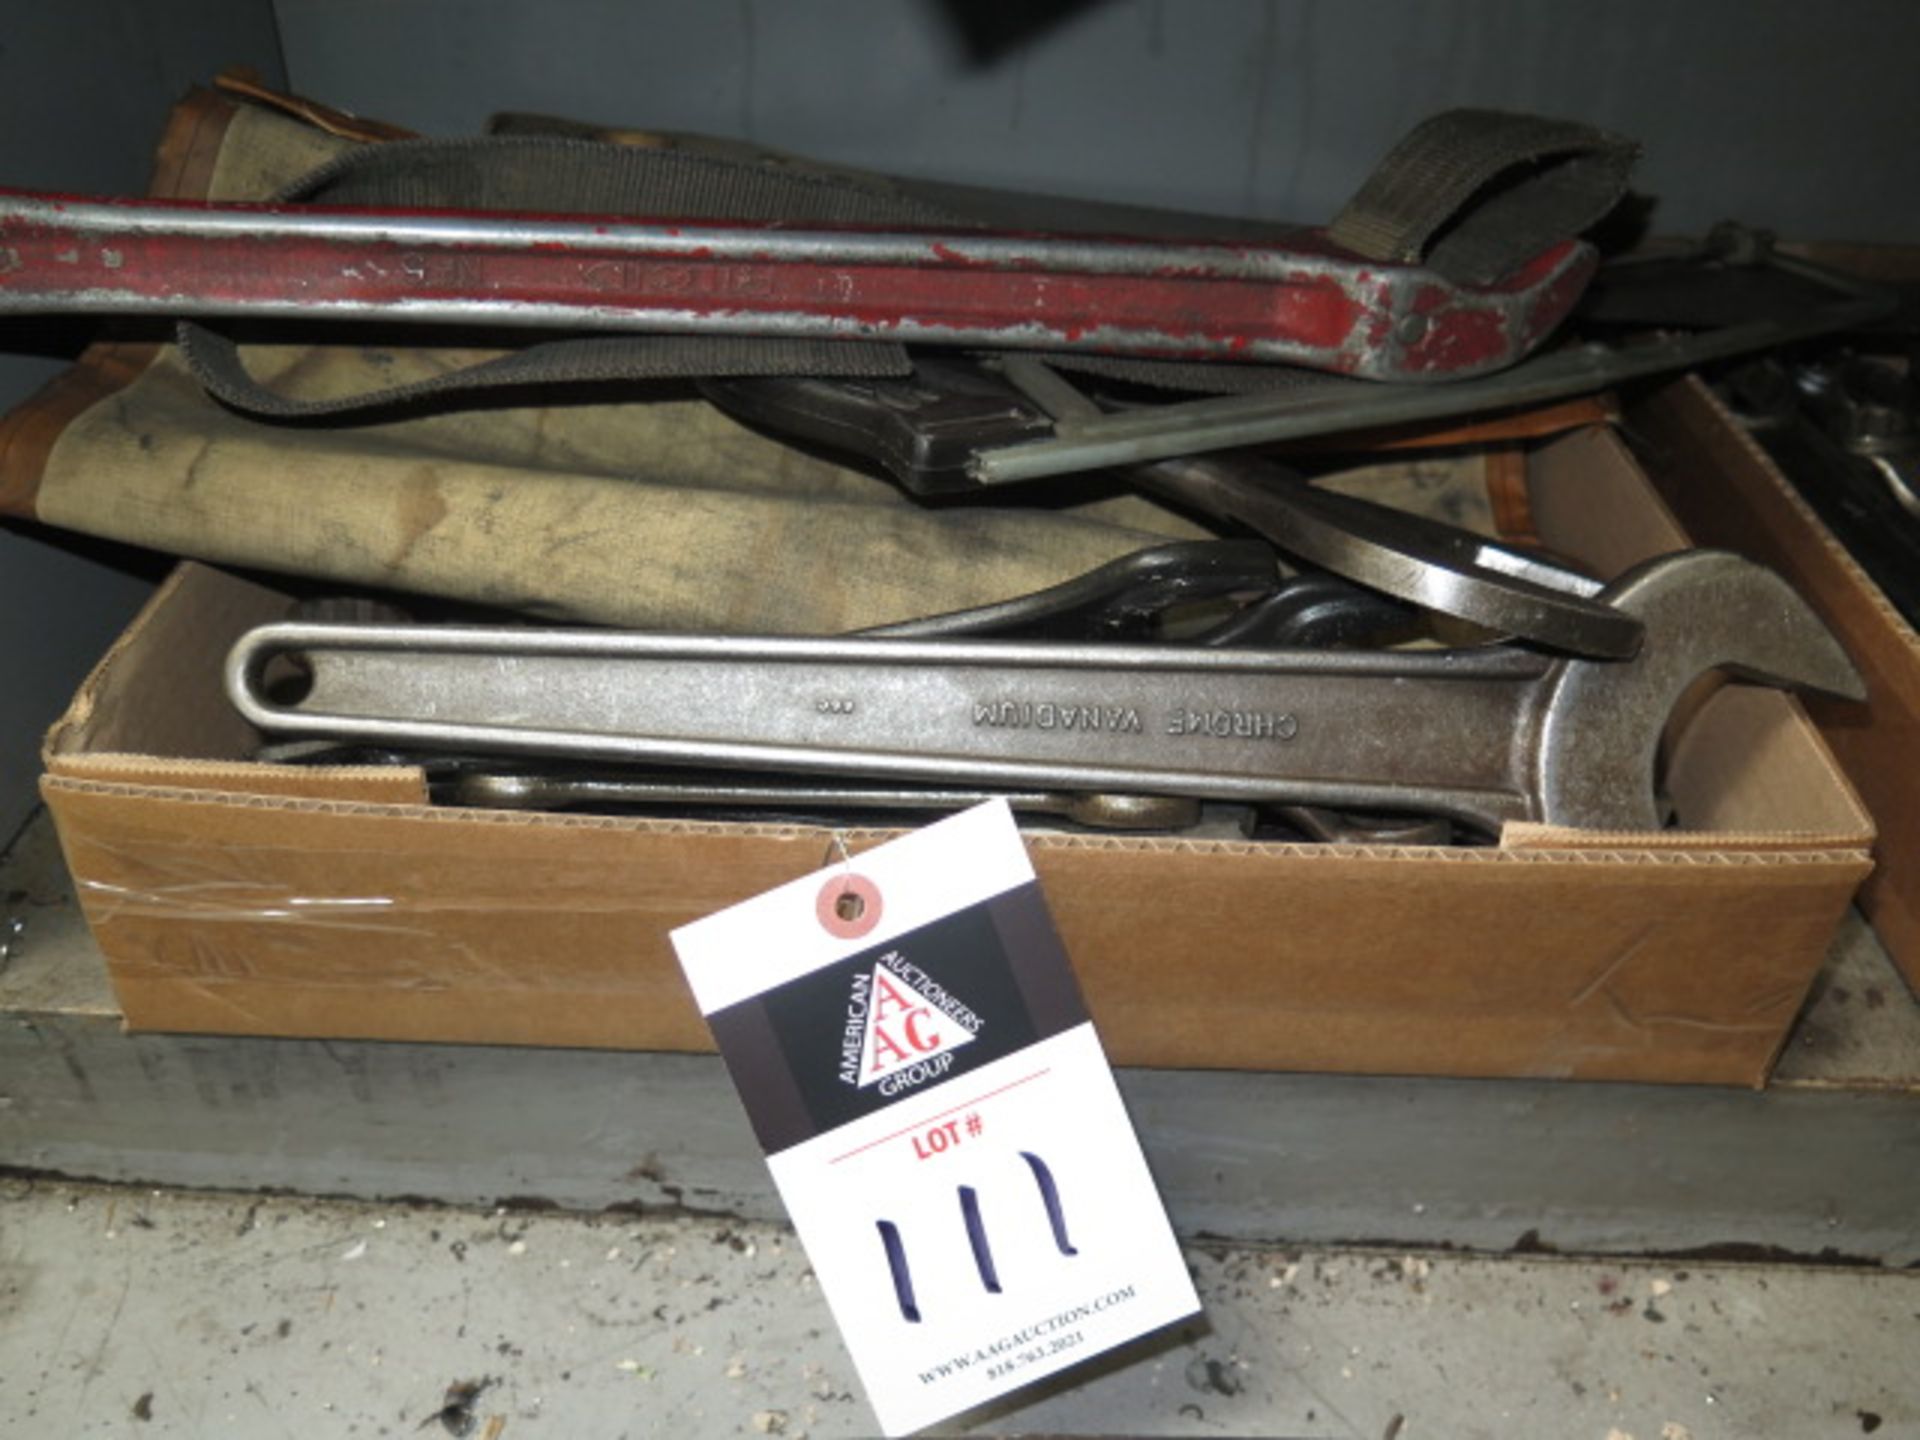 Wrenches (SOLD AS-IS - NO WARRANTY)